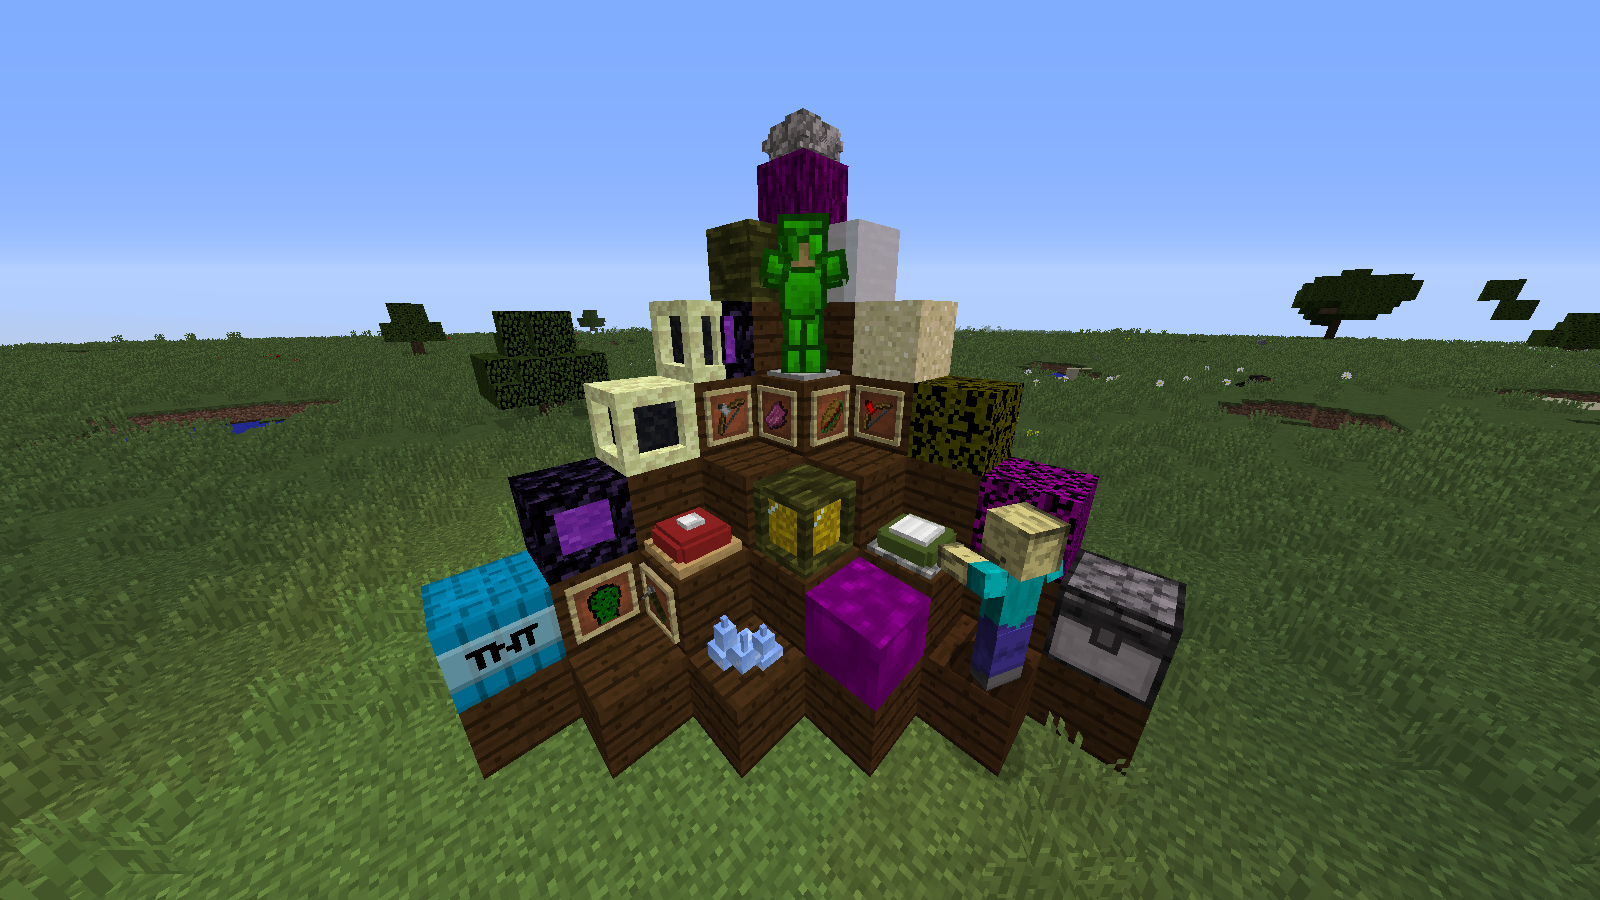 More Minecraft Things Mod!